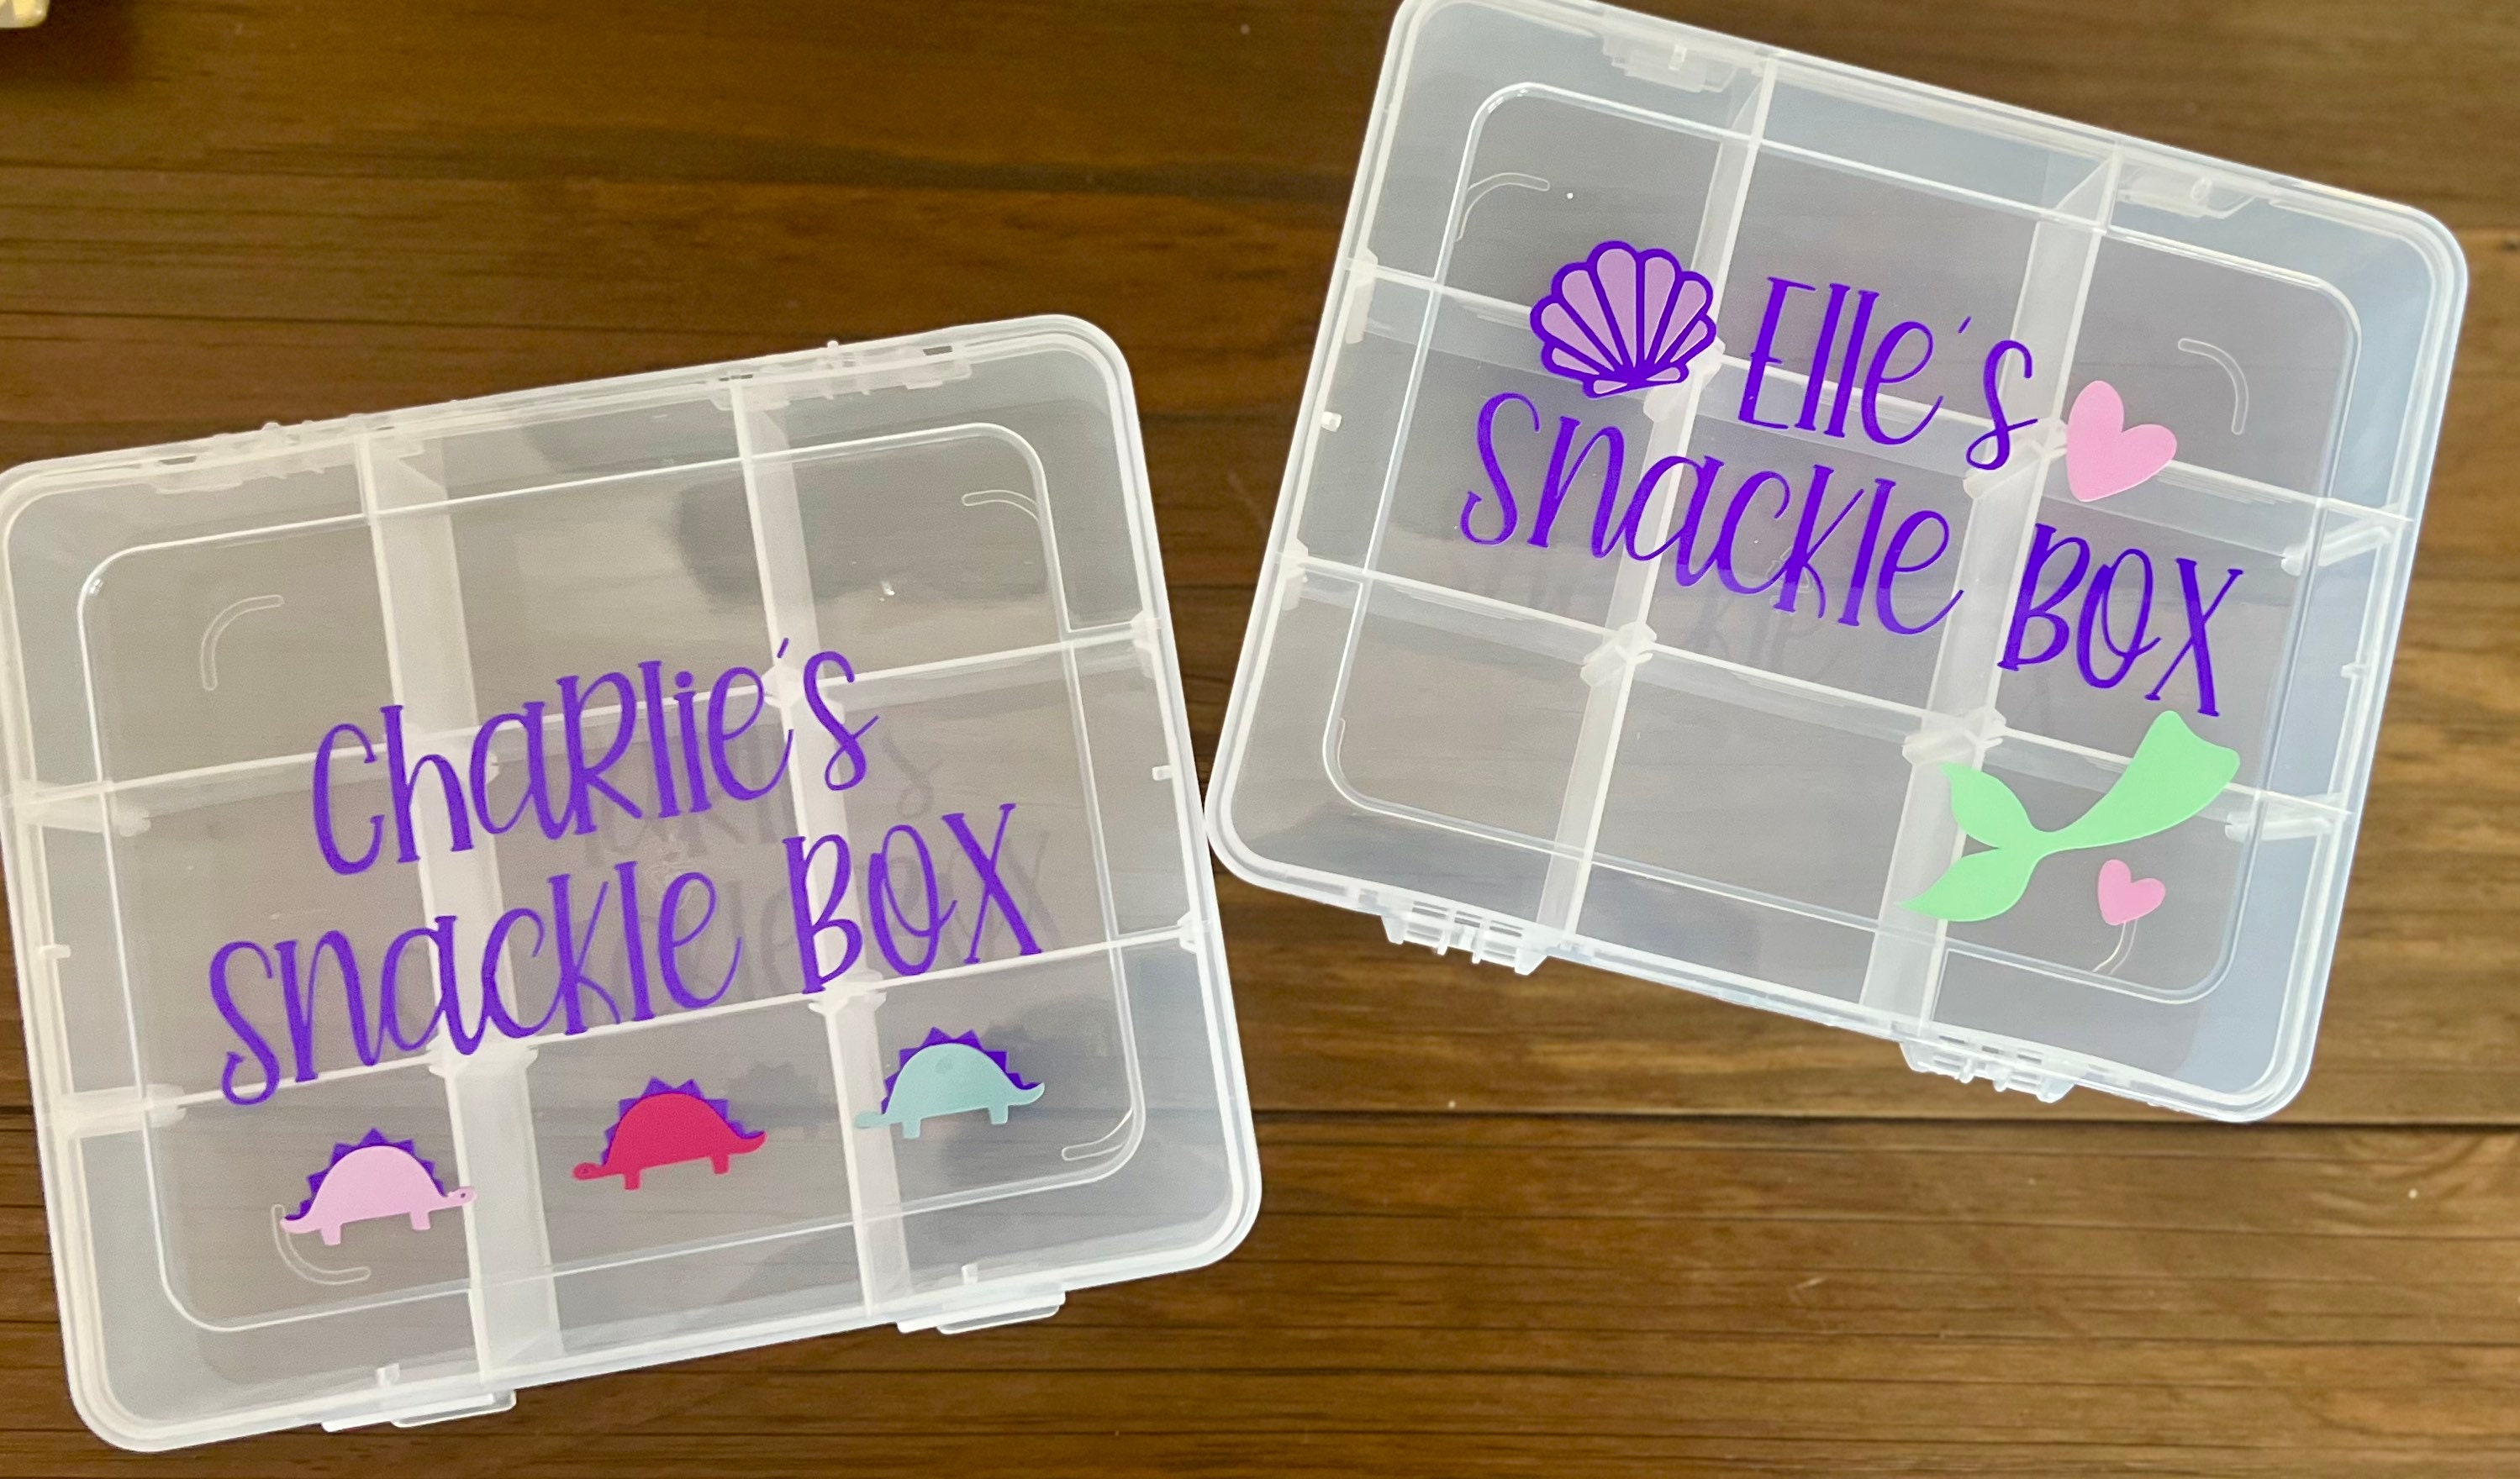 Snackle Box - Inspired By Charm, Snack Tackle Box For Kids 